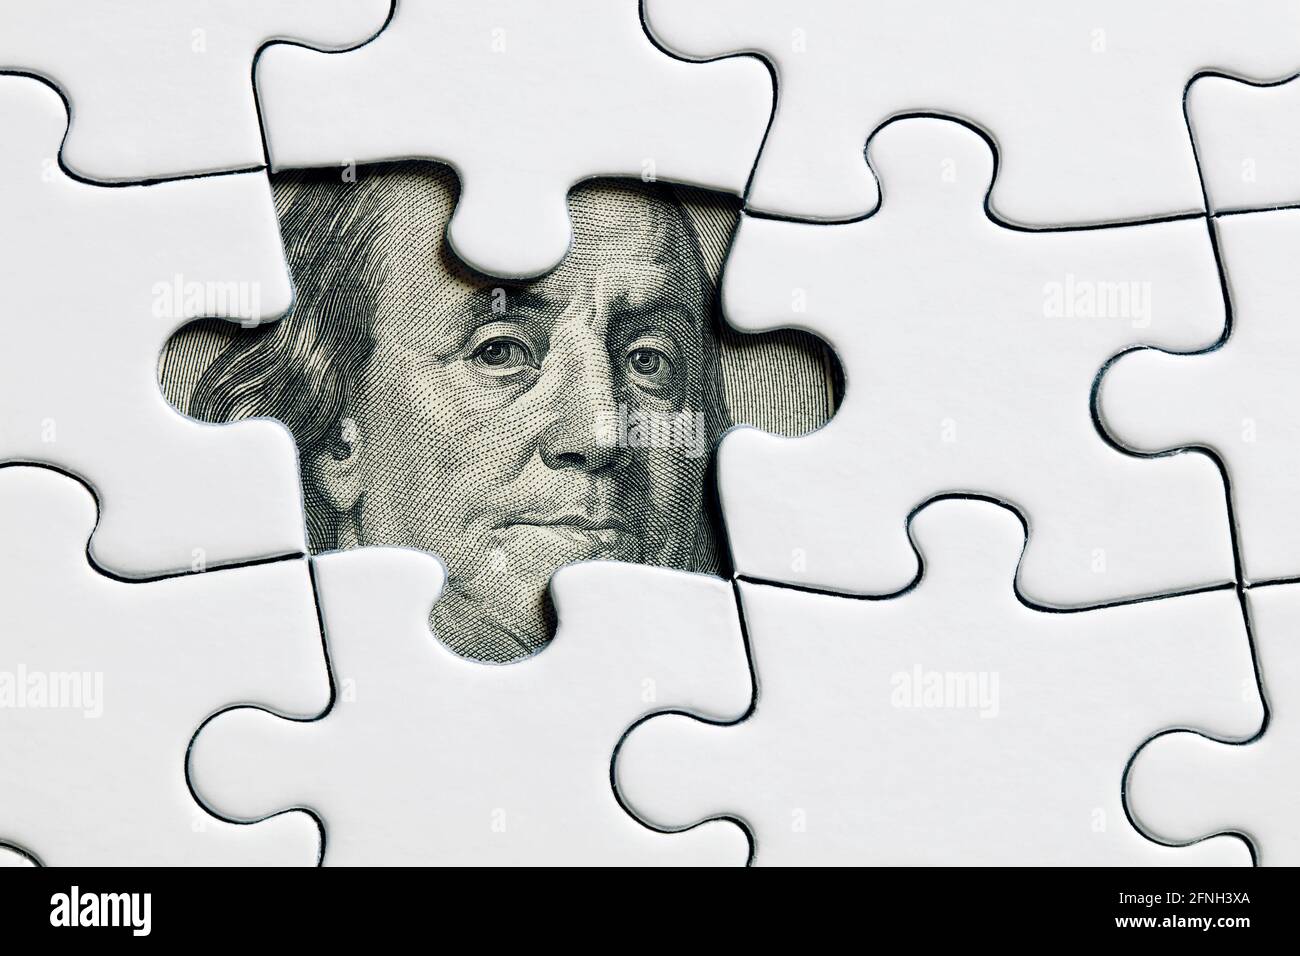 Benjamin Franklin's face from a hundred dollar bill between assembled puzzle pieces. Economic or financial turmoil, uncertainty or devaluation. Stock Photo